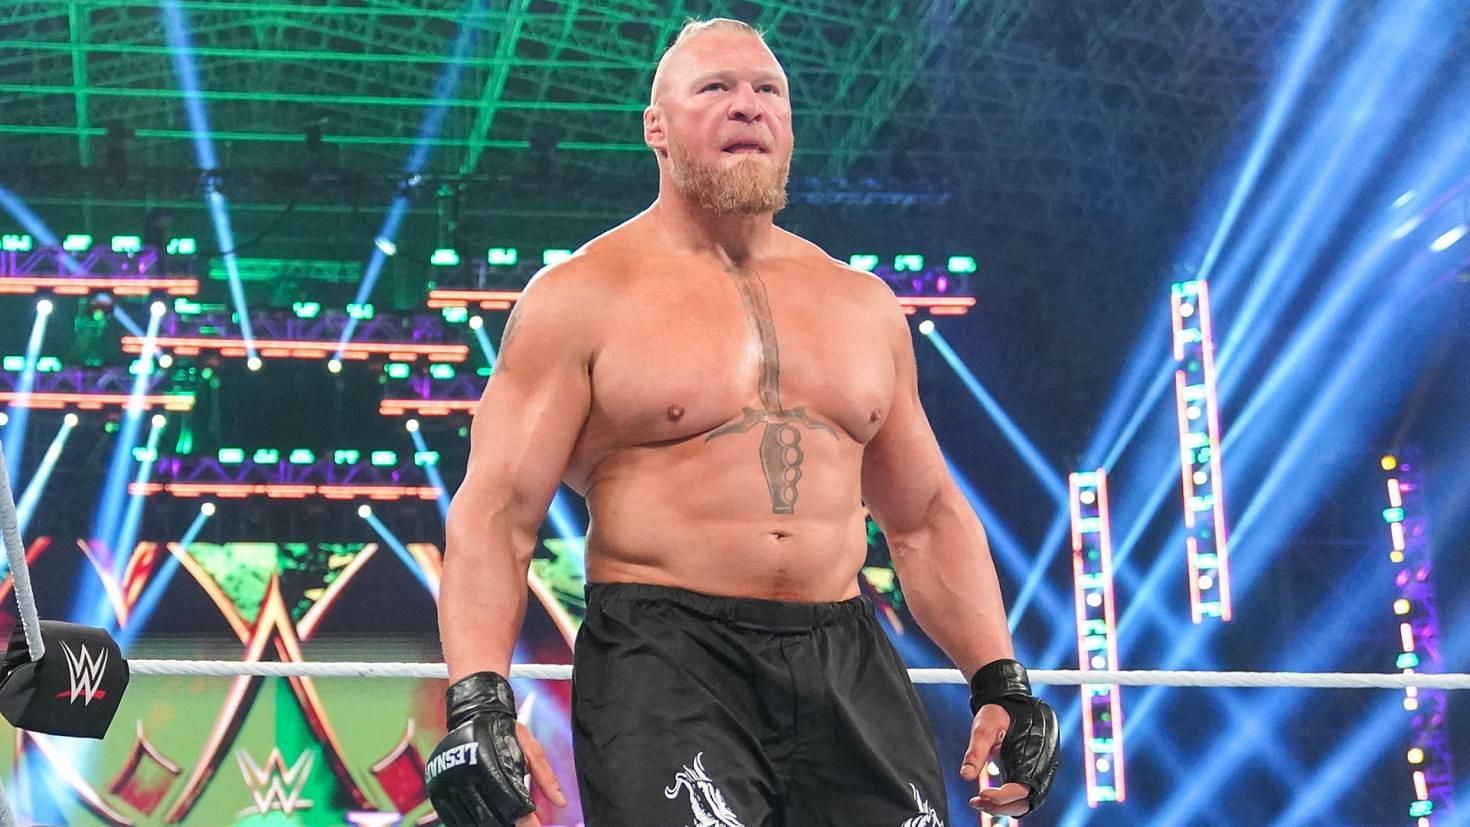 Brock Lesnar recently returned to the WWE ring at Crown Jewel for the first time since WrestleMania 36 Night Two